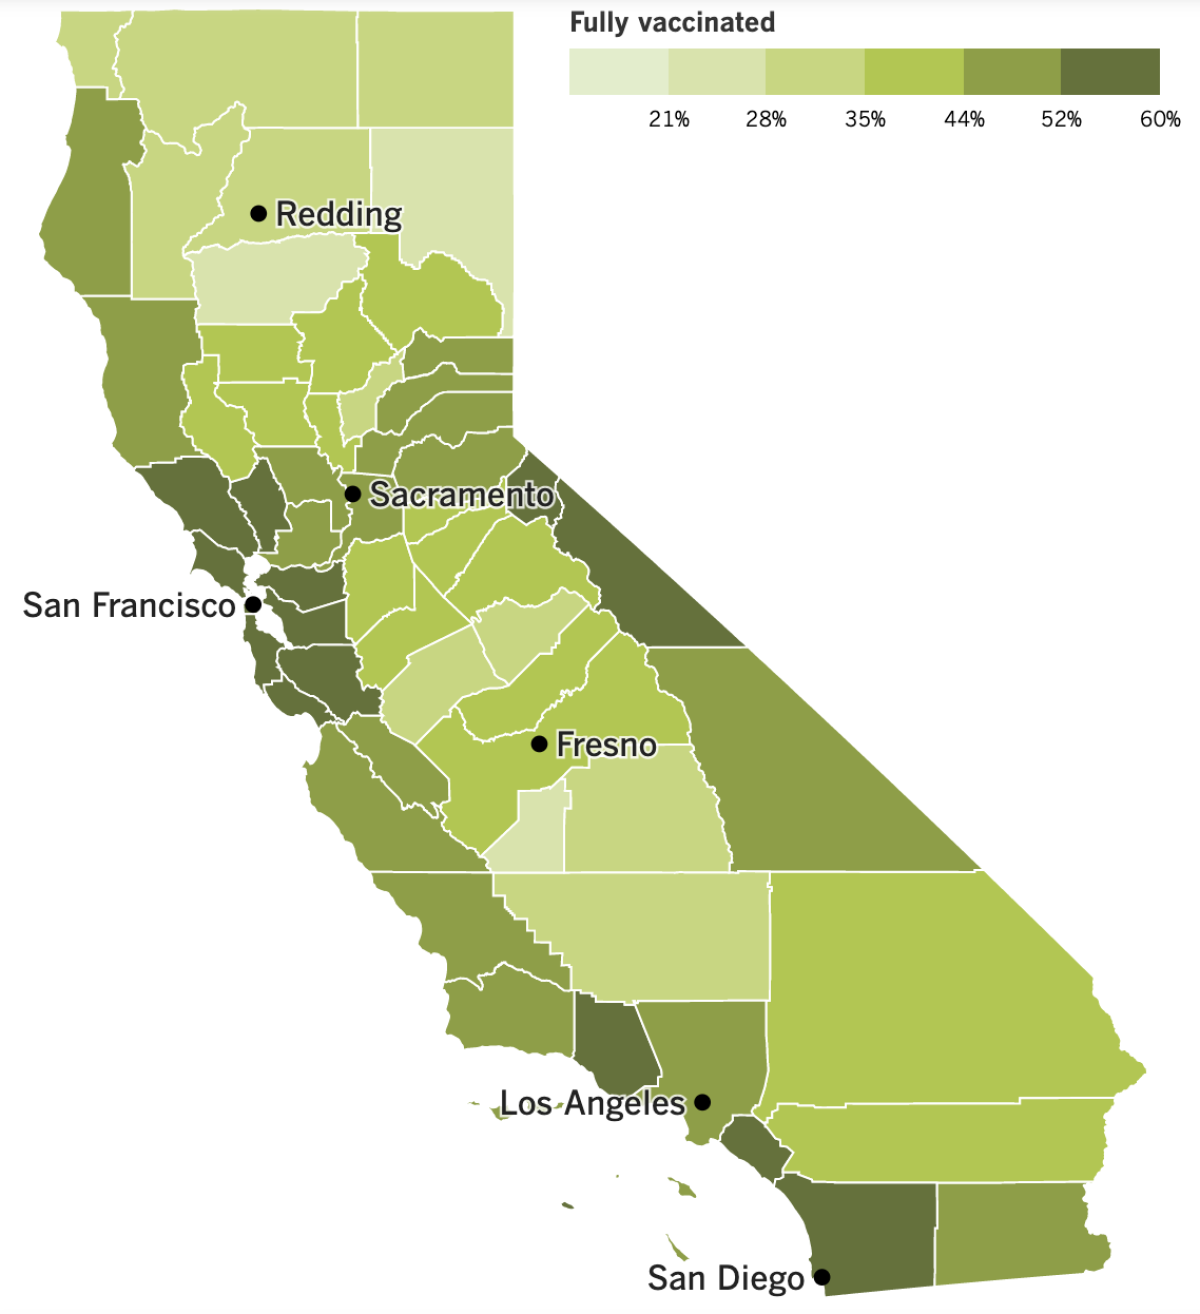 A California map showing vaccination rate by county.